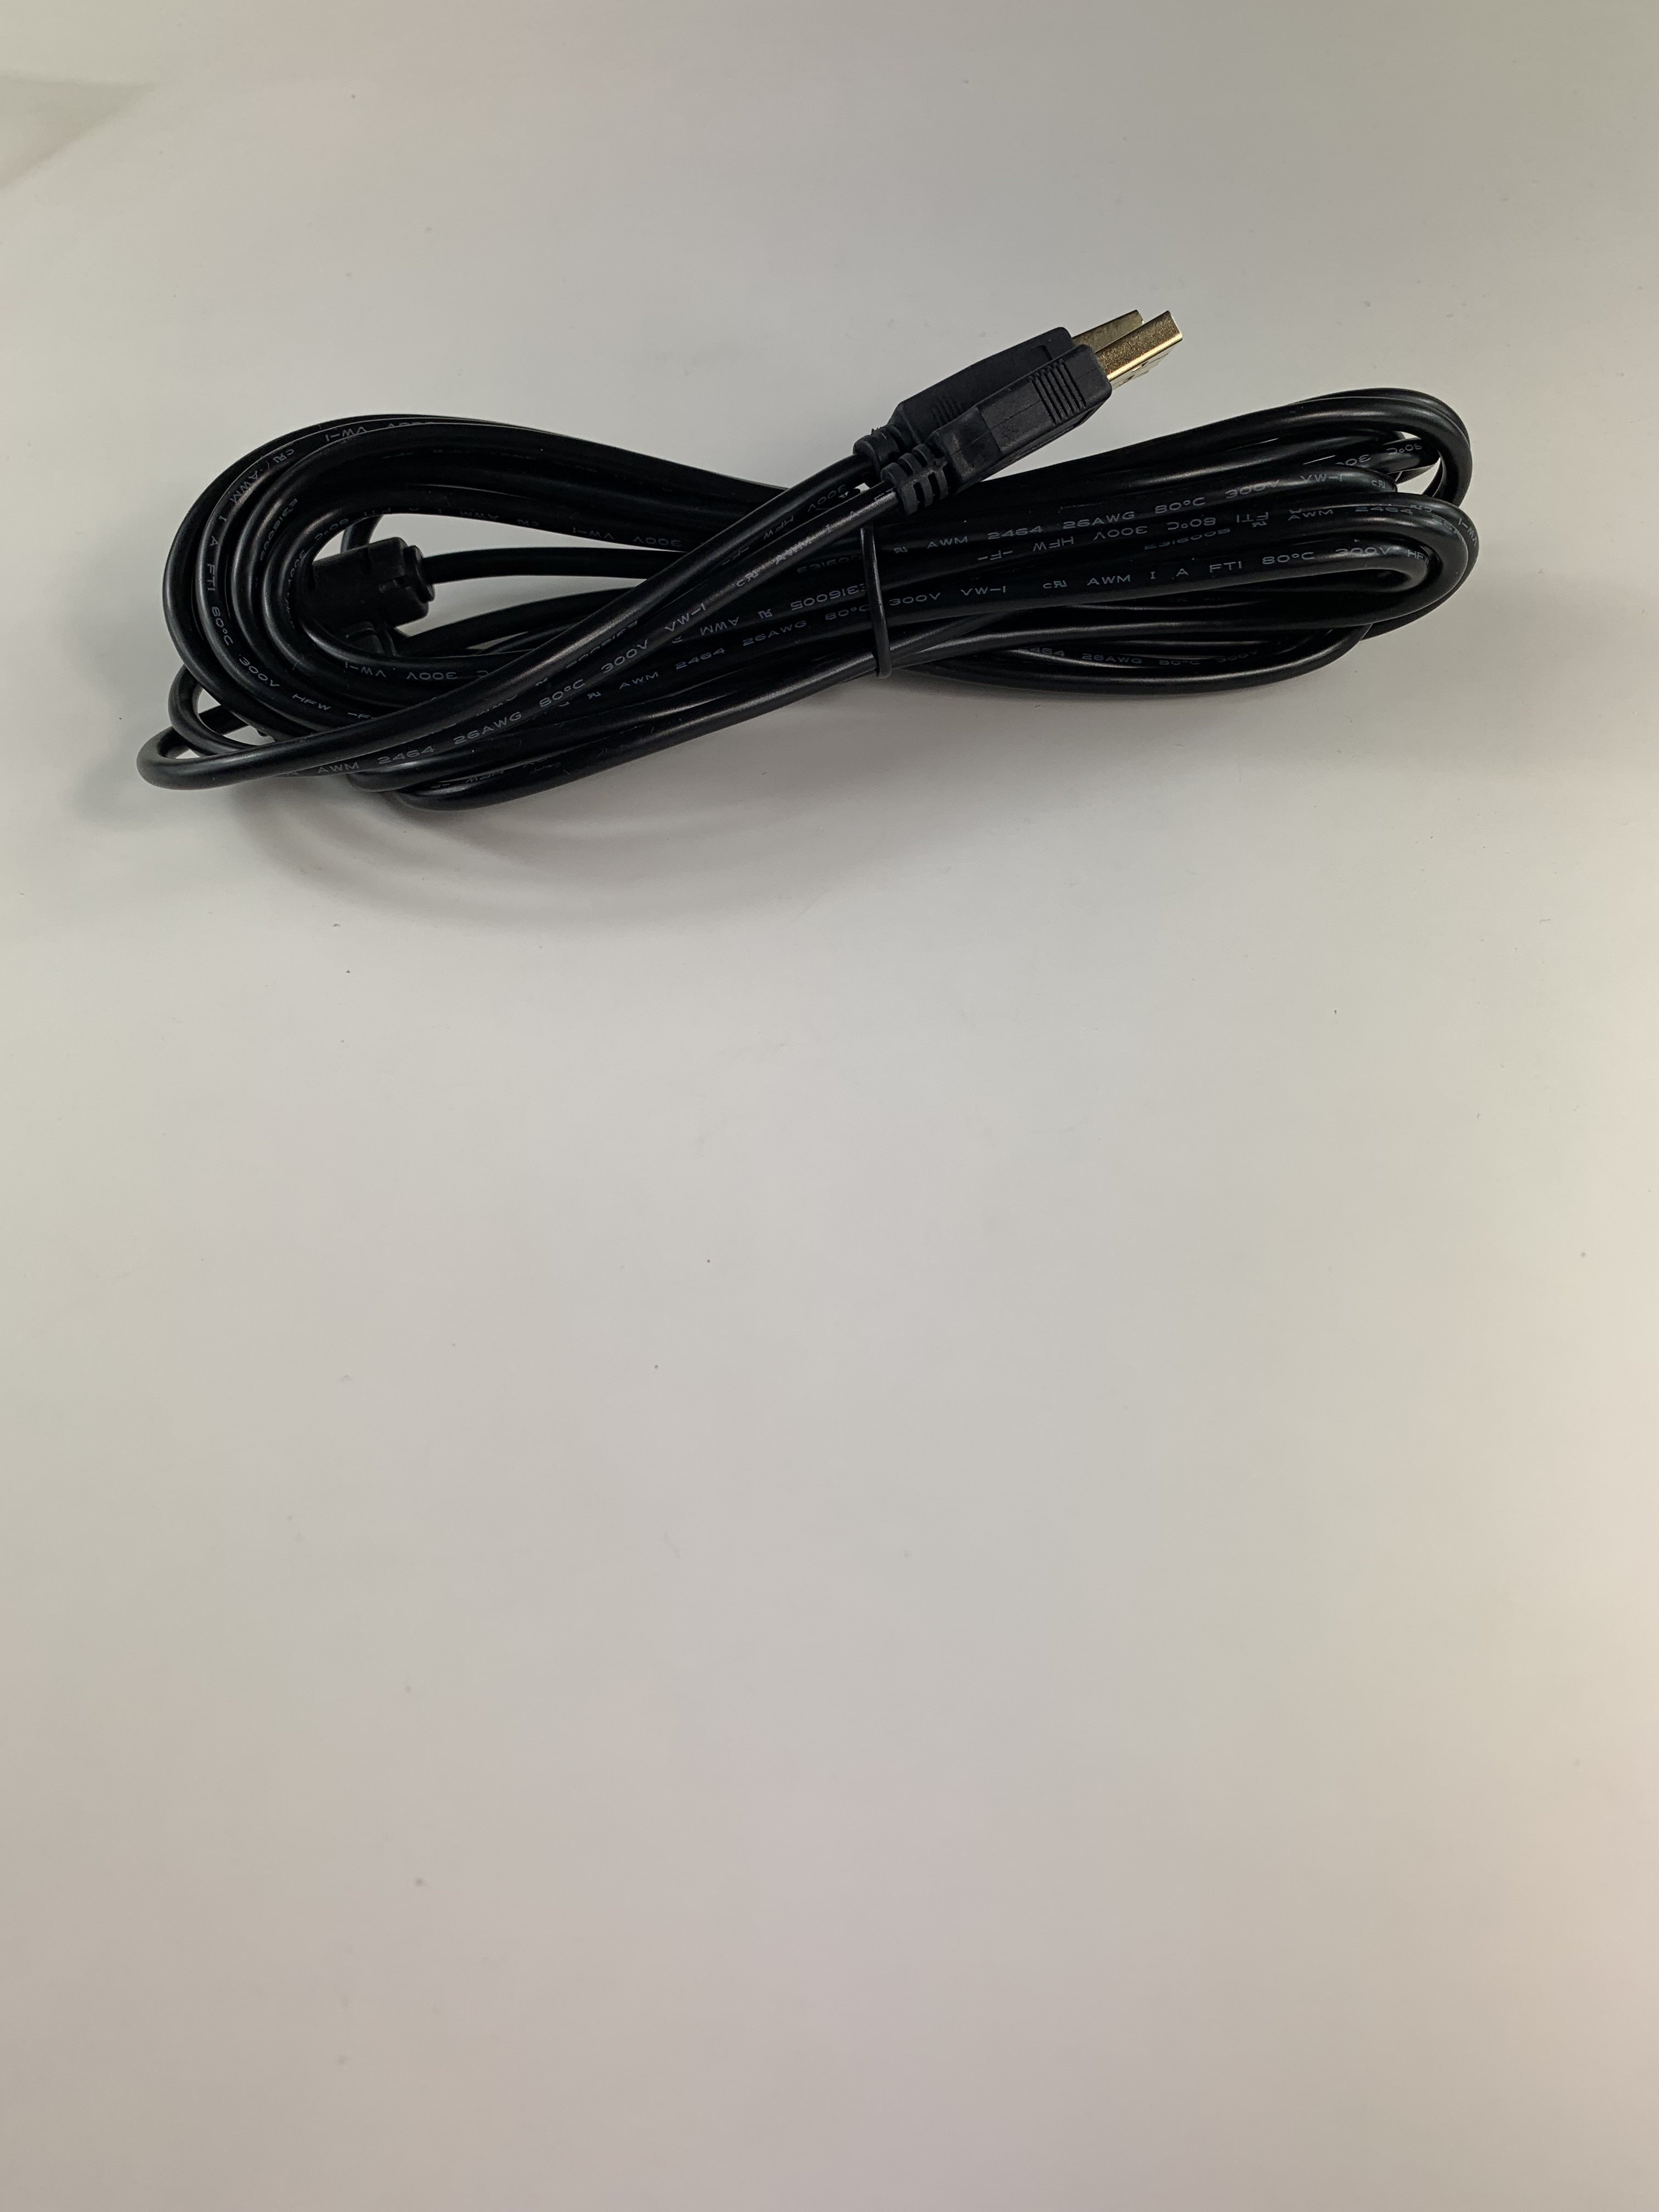 OMNIHIL 15 Feet Long High Speed USB 2.0 Cable Compatible with ENTTEC&nbsp;DMXIS 512-Ch USB DMX Interface - image 1 of 1